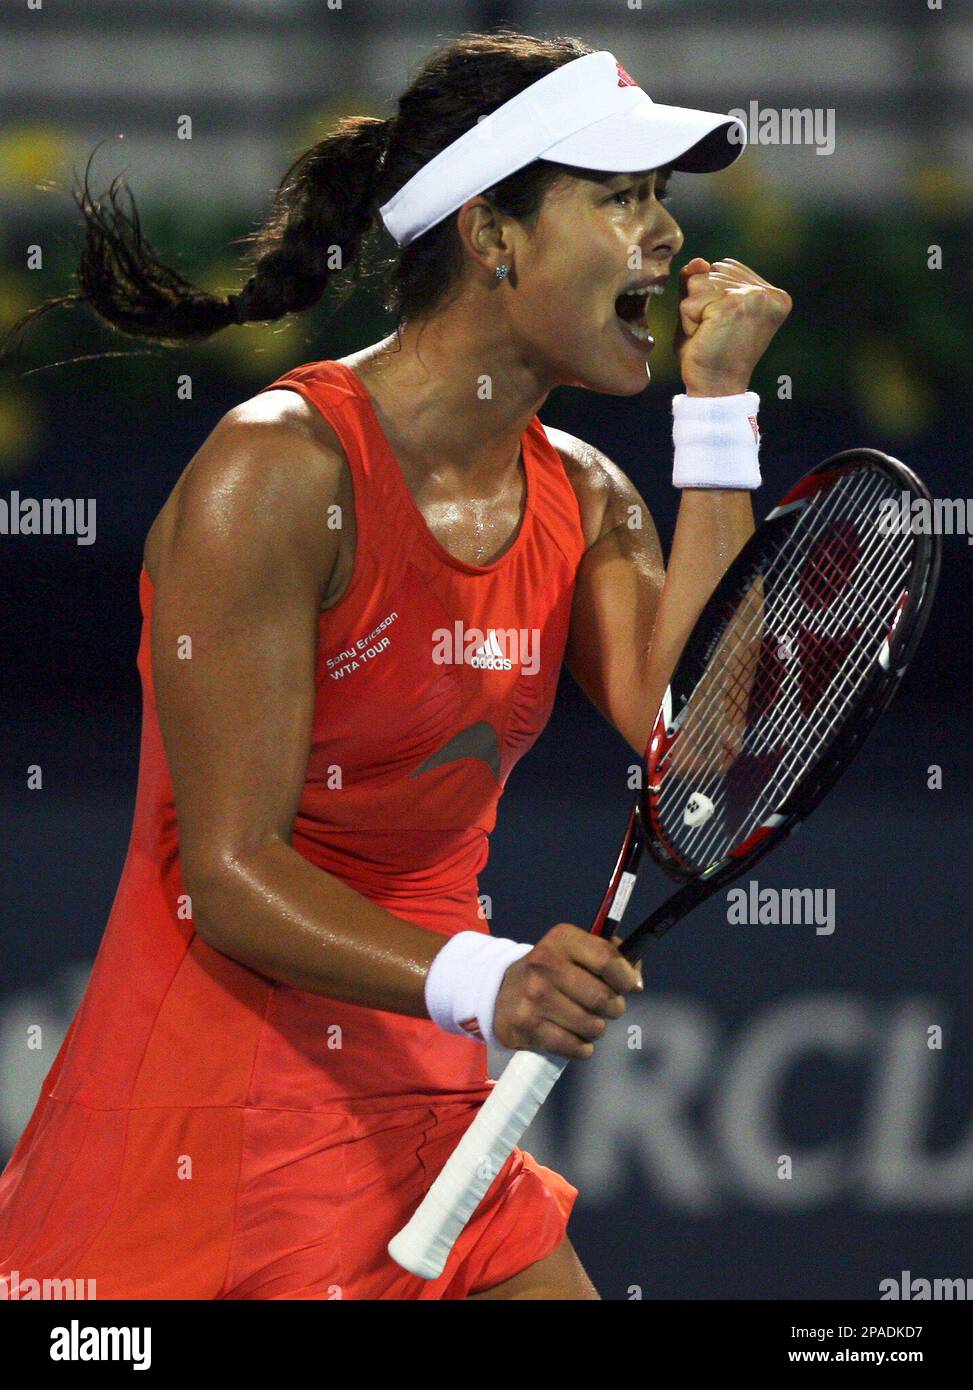 Ana Ivanovic of Serbia reacts after she scores against Elena Dementieva of  Russia during the quarter final of the Dubai Duty Free Women's Tennis Open  2008 in Dubai, United Arab Emirates,Thursday Feb.